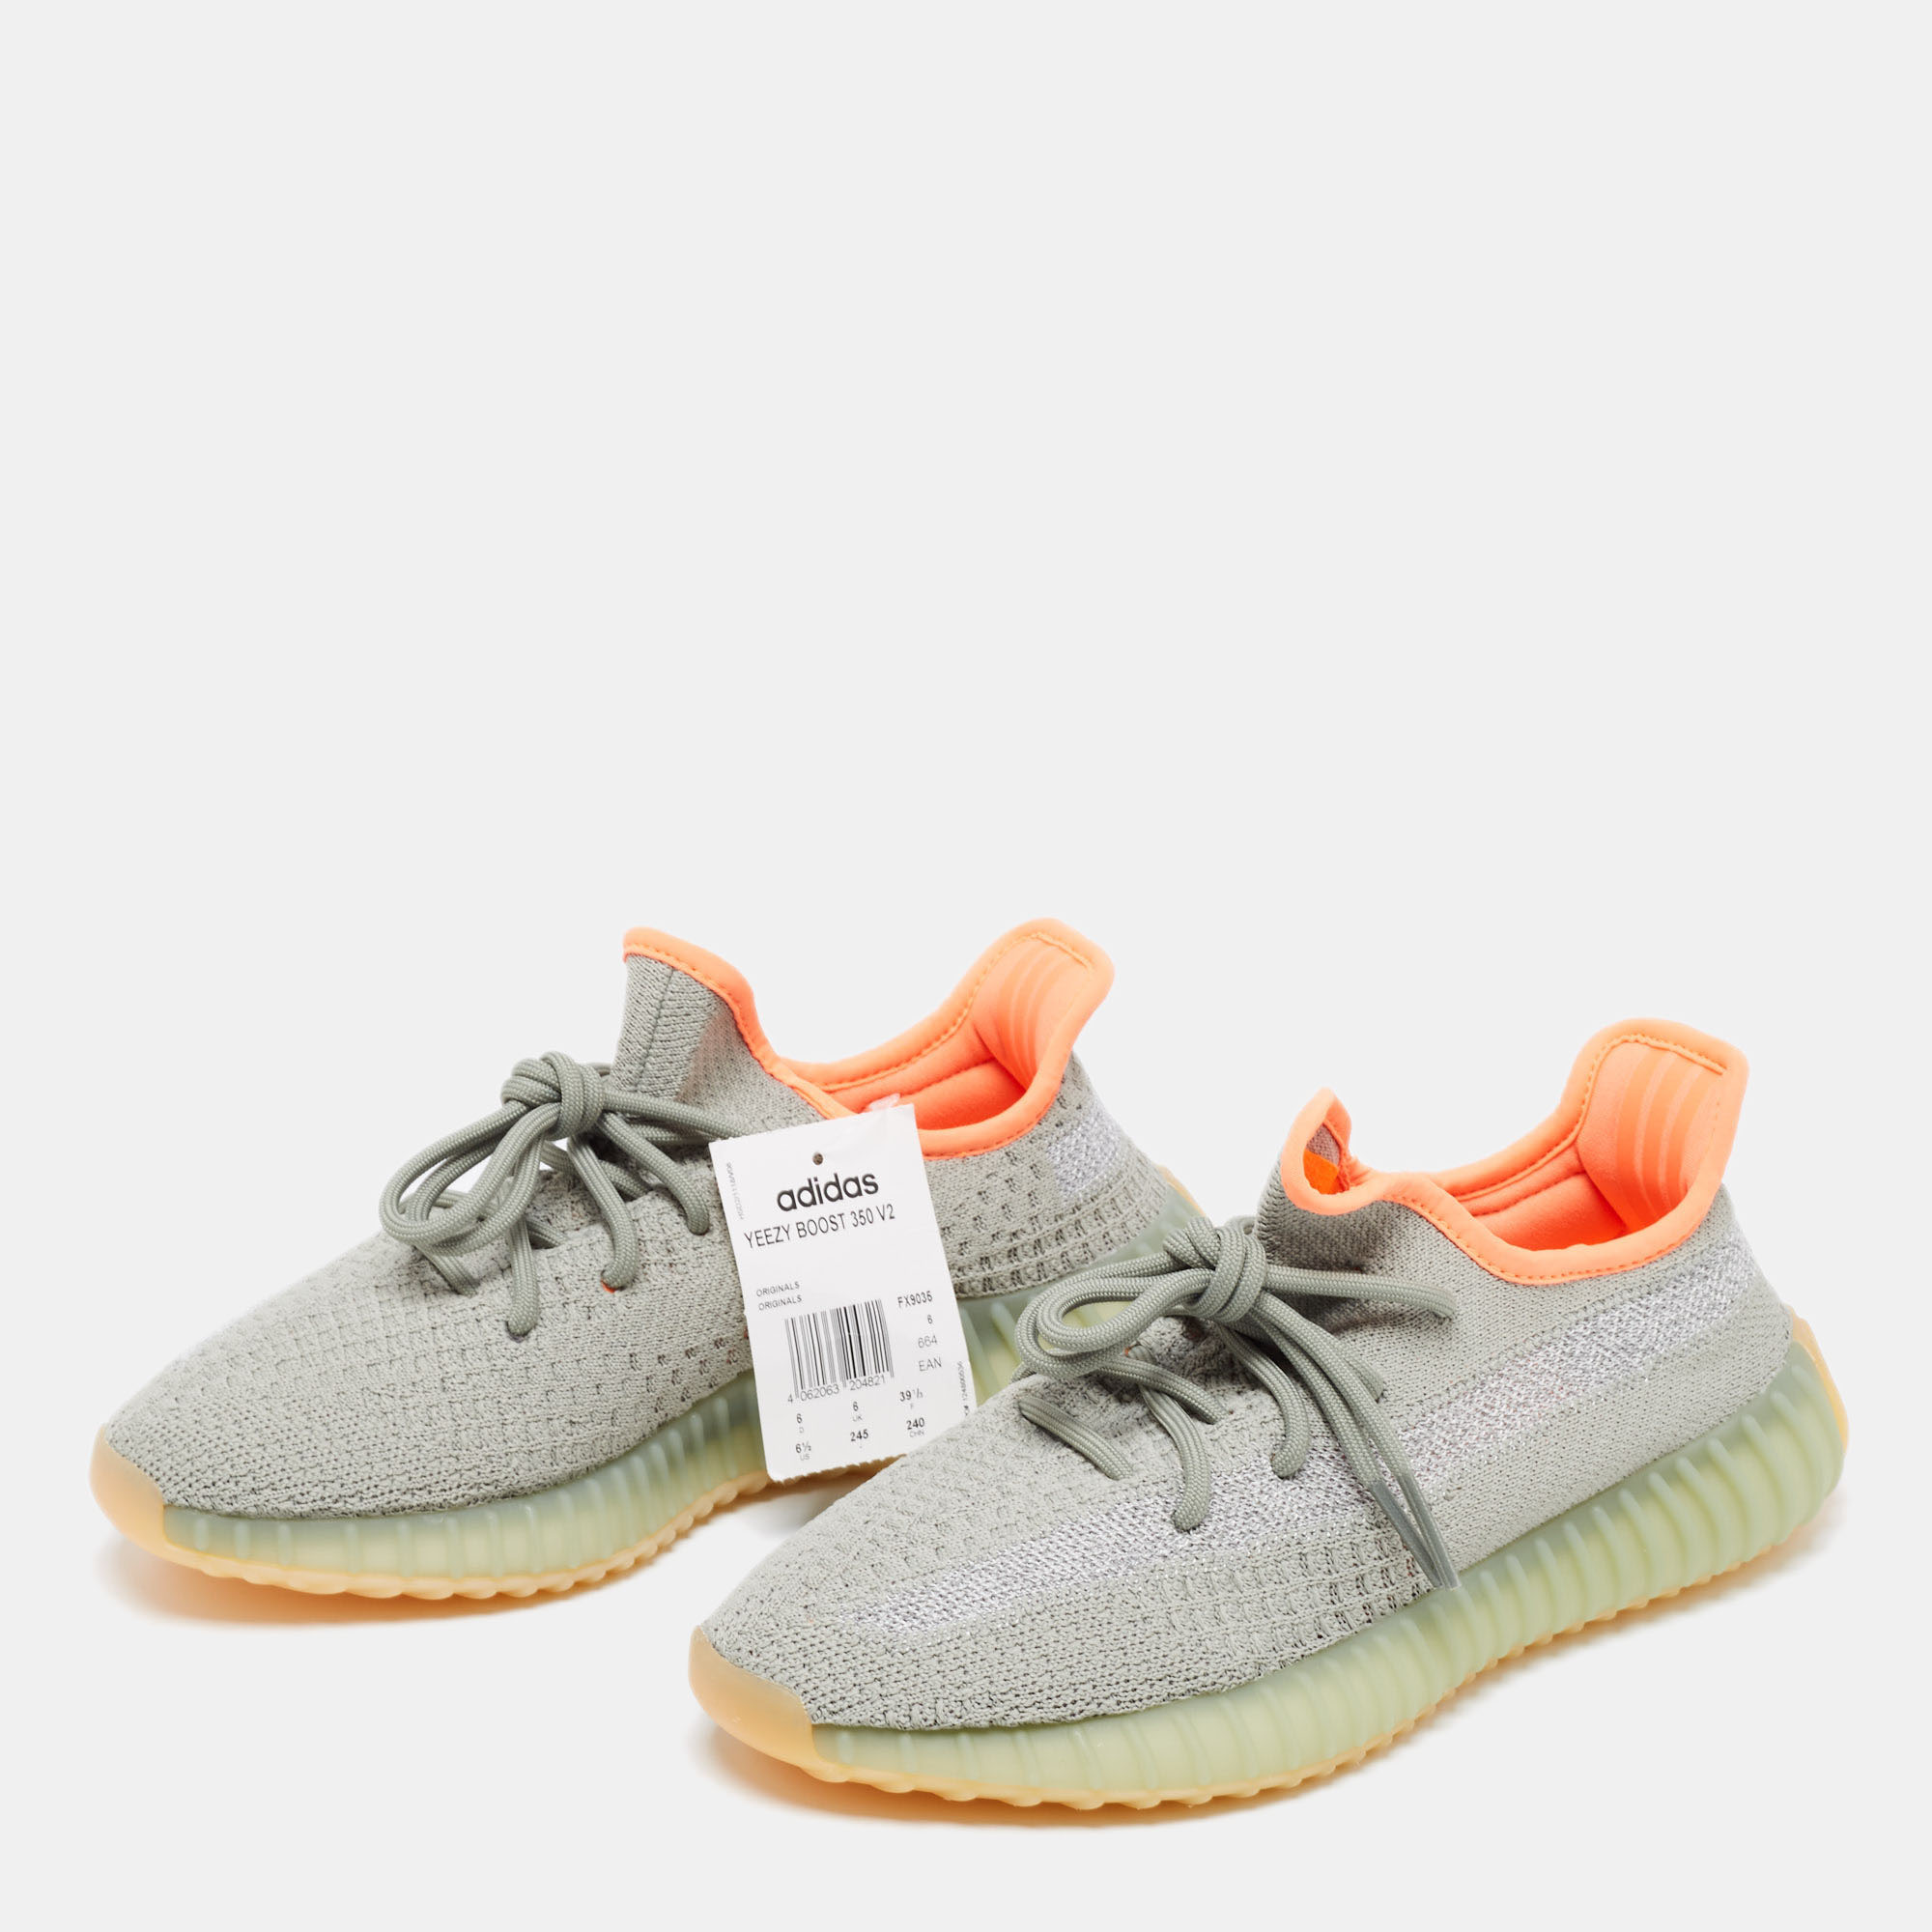 

Yeezy x Adidas Light Green/Grey Knit Fabric Boost 350 V2 Desert Sage Sneakers Size 39 1/3